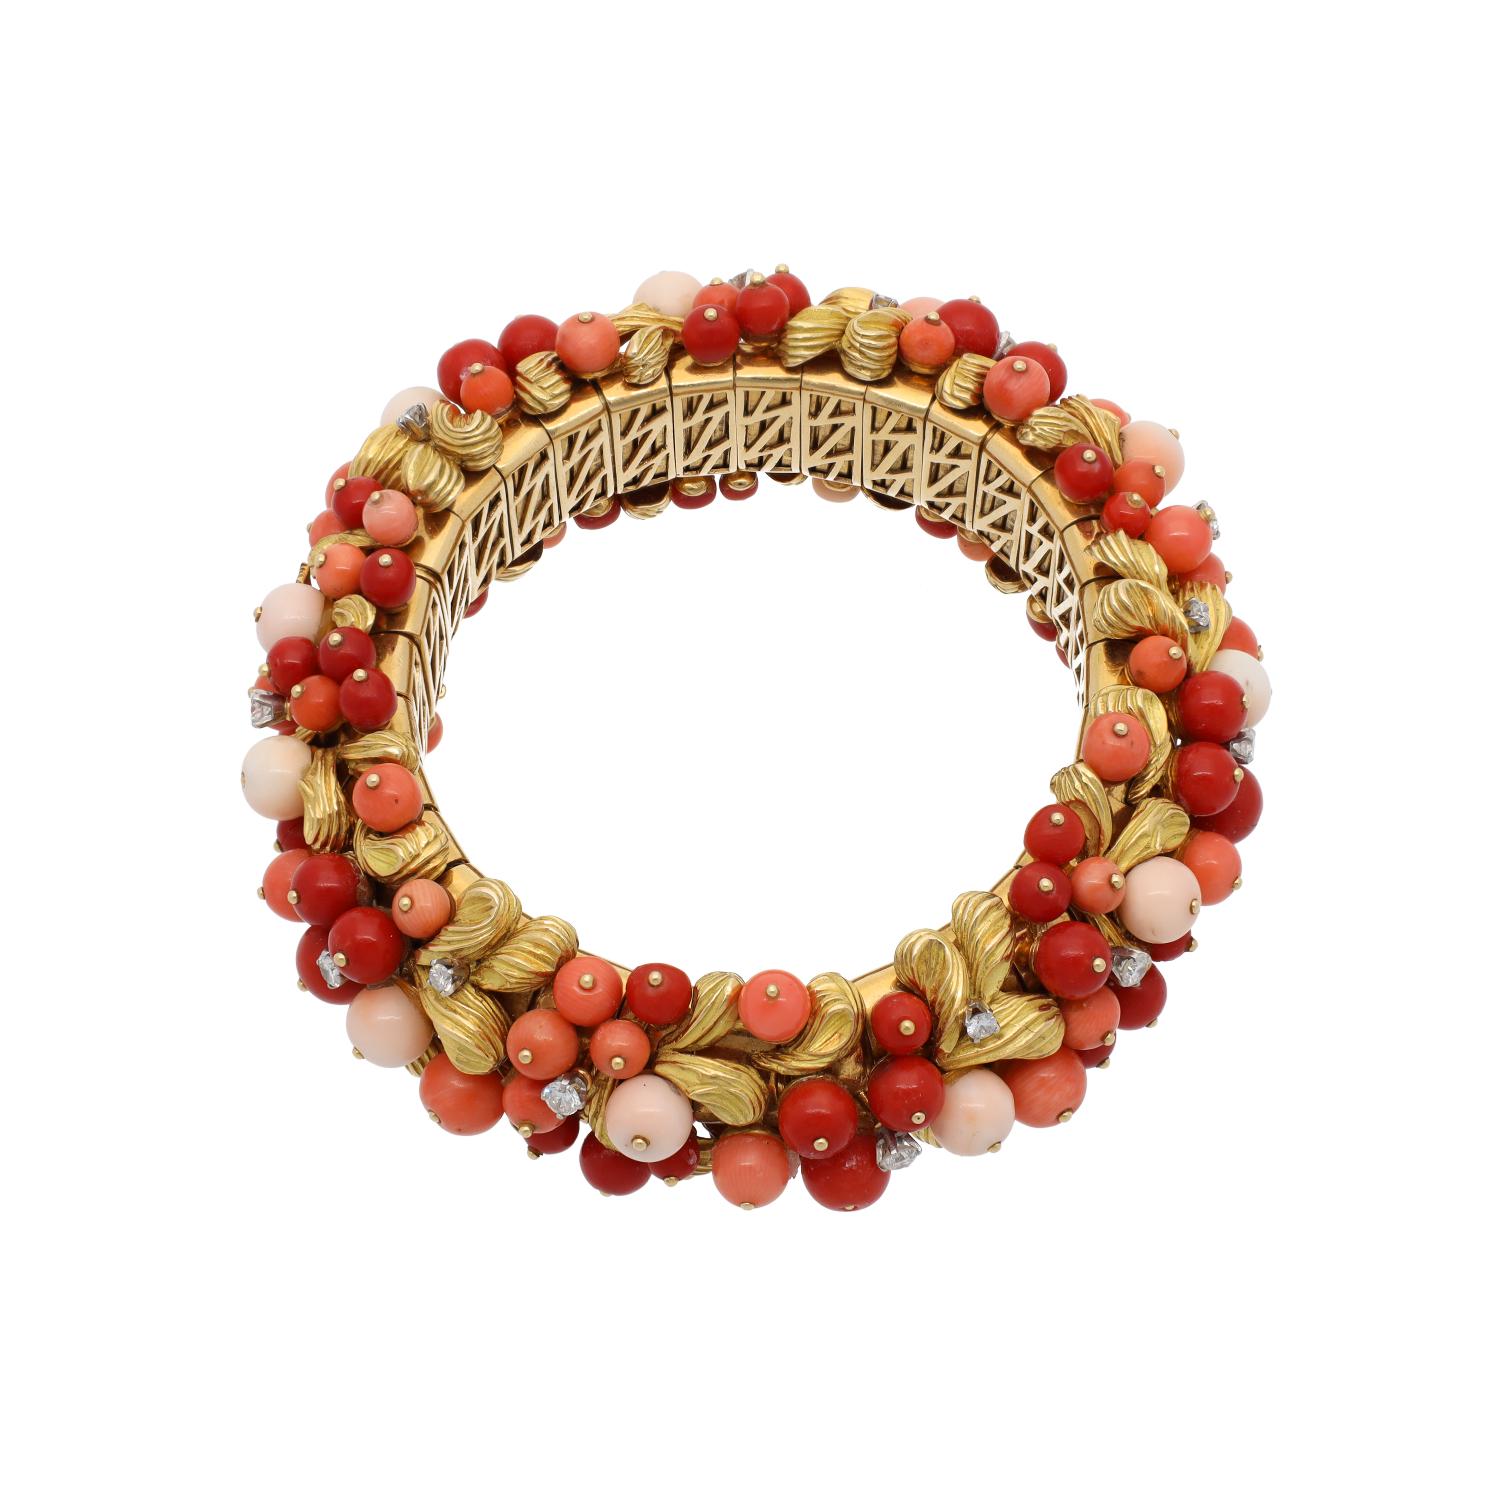 Bulgari Rome Vintage Multi Color Coral Diamond Gold Bangle
An unusual Bulgari 1960s 18kt yellow gold bracelet of gold shell motifs strewn with finest natural Mediterranean blood, orange, and angel skin coral beads delicately dotted with round